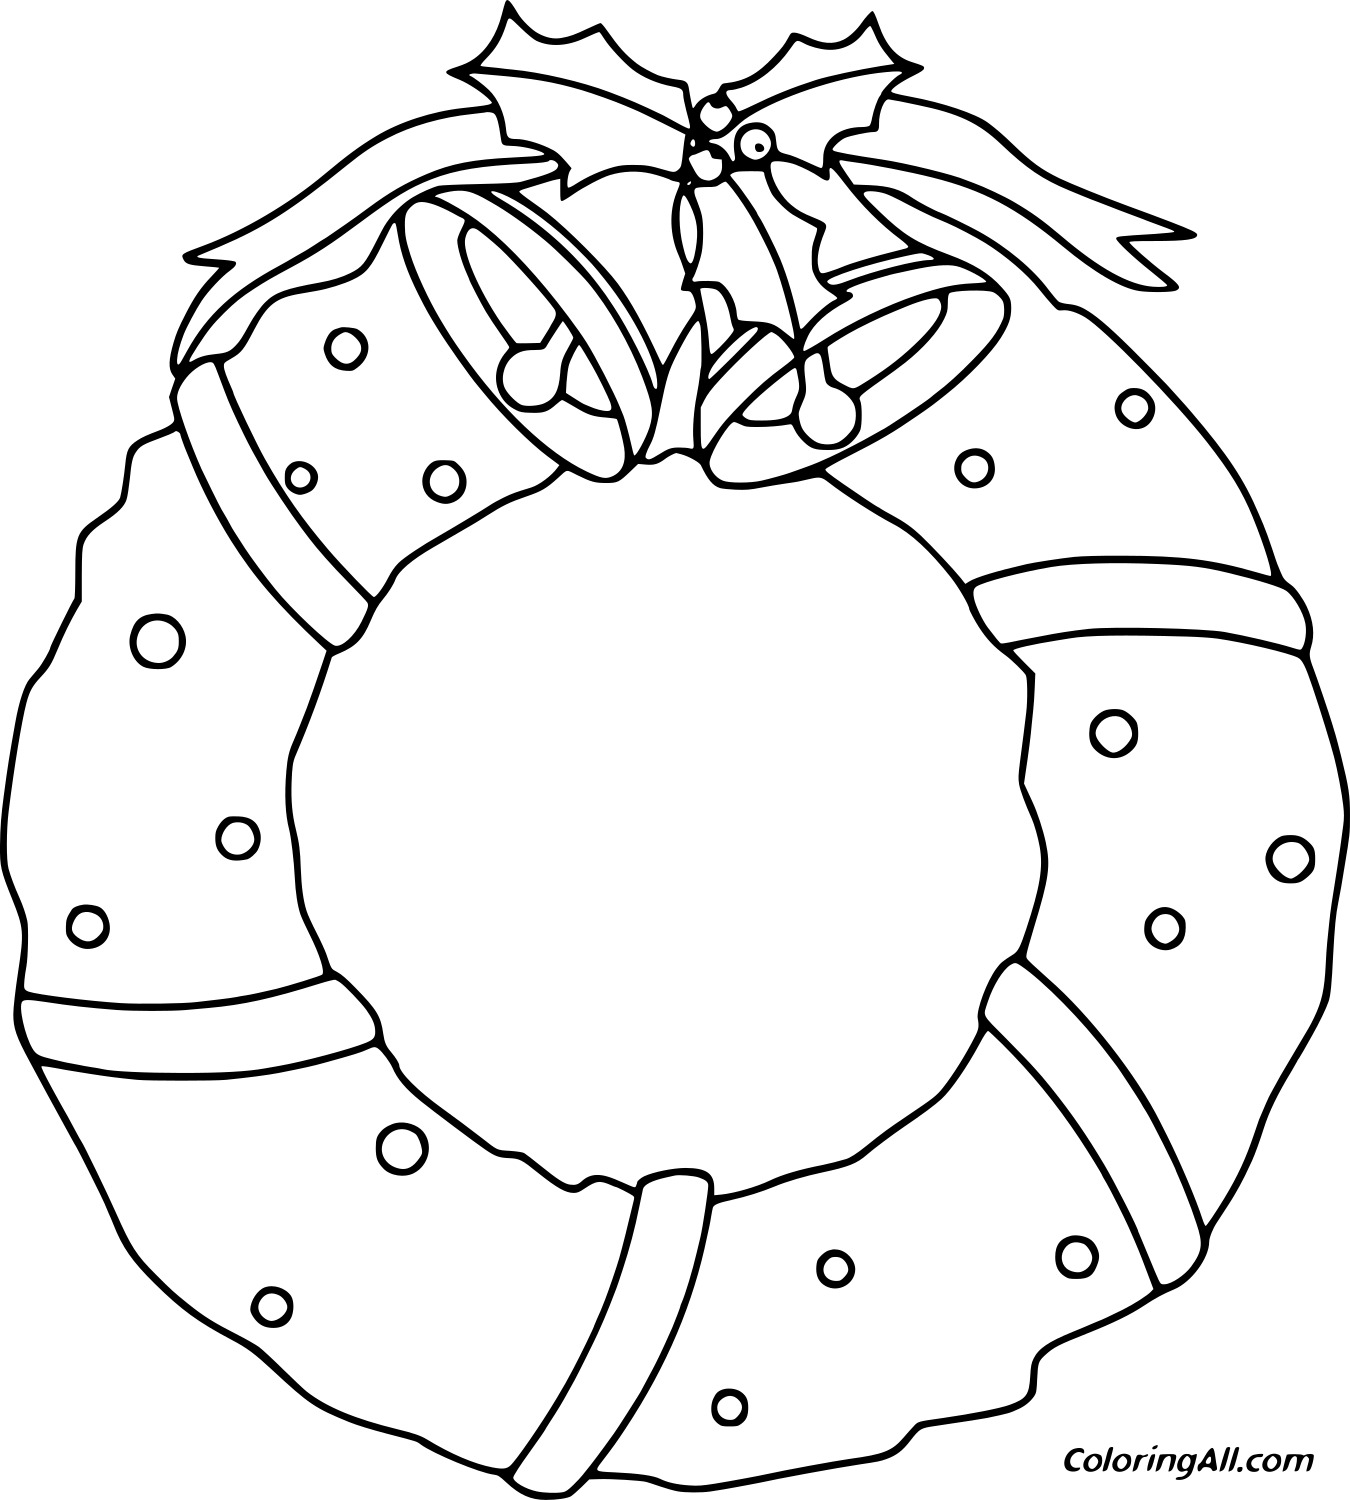 Holly Ring And Bells Image For Children Coloring Page